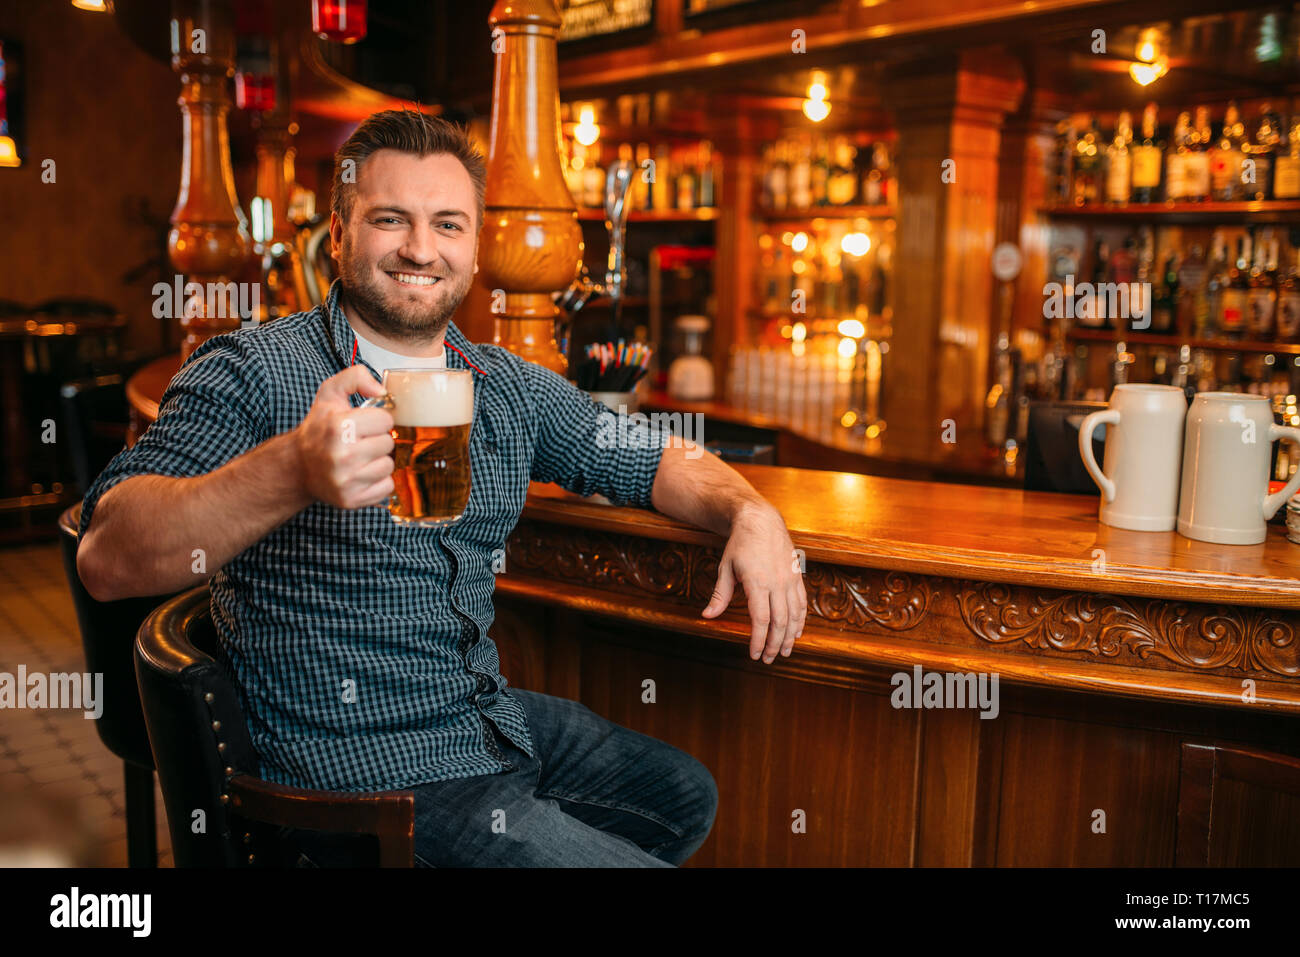 Cheerful man with beer mug at the counter in pub Stock Photo